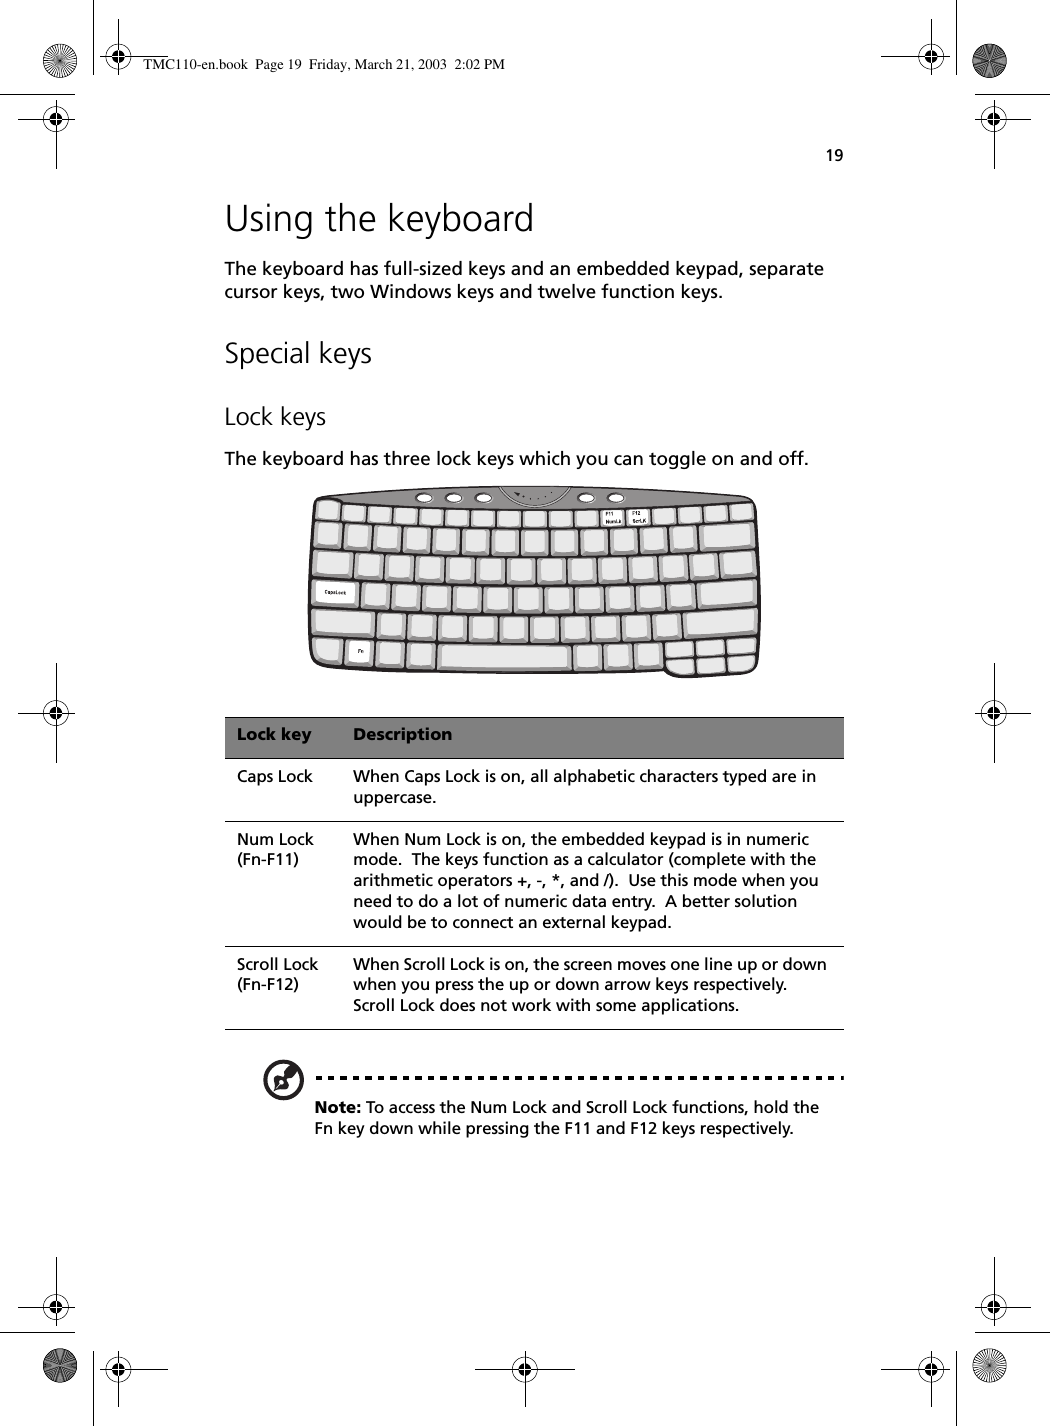 19Using the keyboardThe keyboard has full-sized keys and an embedded keypad, separate cursor keys, two Windows keys and twelve function keys.Special keysLock keysThe keyboard has three lock keys which you can toggle on and off.   Note: To access the Num Lock and Scroll Lock functions, hold the Fn key down while pressing the F11 and F12 keys respectively.Lock key DescriptionCaps Lock When Caps Lock is on, all alphabetic characters typed are in uppercase.Num Lock (Fn-F11)When Num Lock is on, the embedded keypad is in numeric mode.  The keys function as a calculator (complete with the arithmetic operators +, -, *, and /).  Use this mode when you need to do a lot of numeric data entry.  A better solution would be to connect an external keypad.Scroll Lock (Fn-F12)When Scroll Lock is on, the screen moves one line up or down when you press the up or down arrow keys respectively.  Scroll Lock does not work with some applications.TMC110-en.book  Page 19  Friday, March 21, 2003  2:02 PM